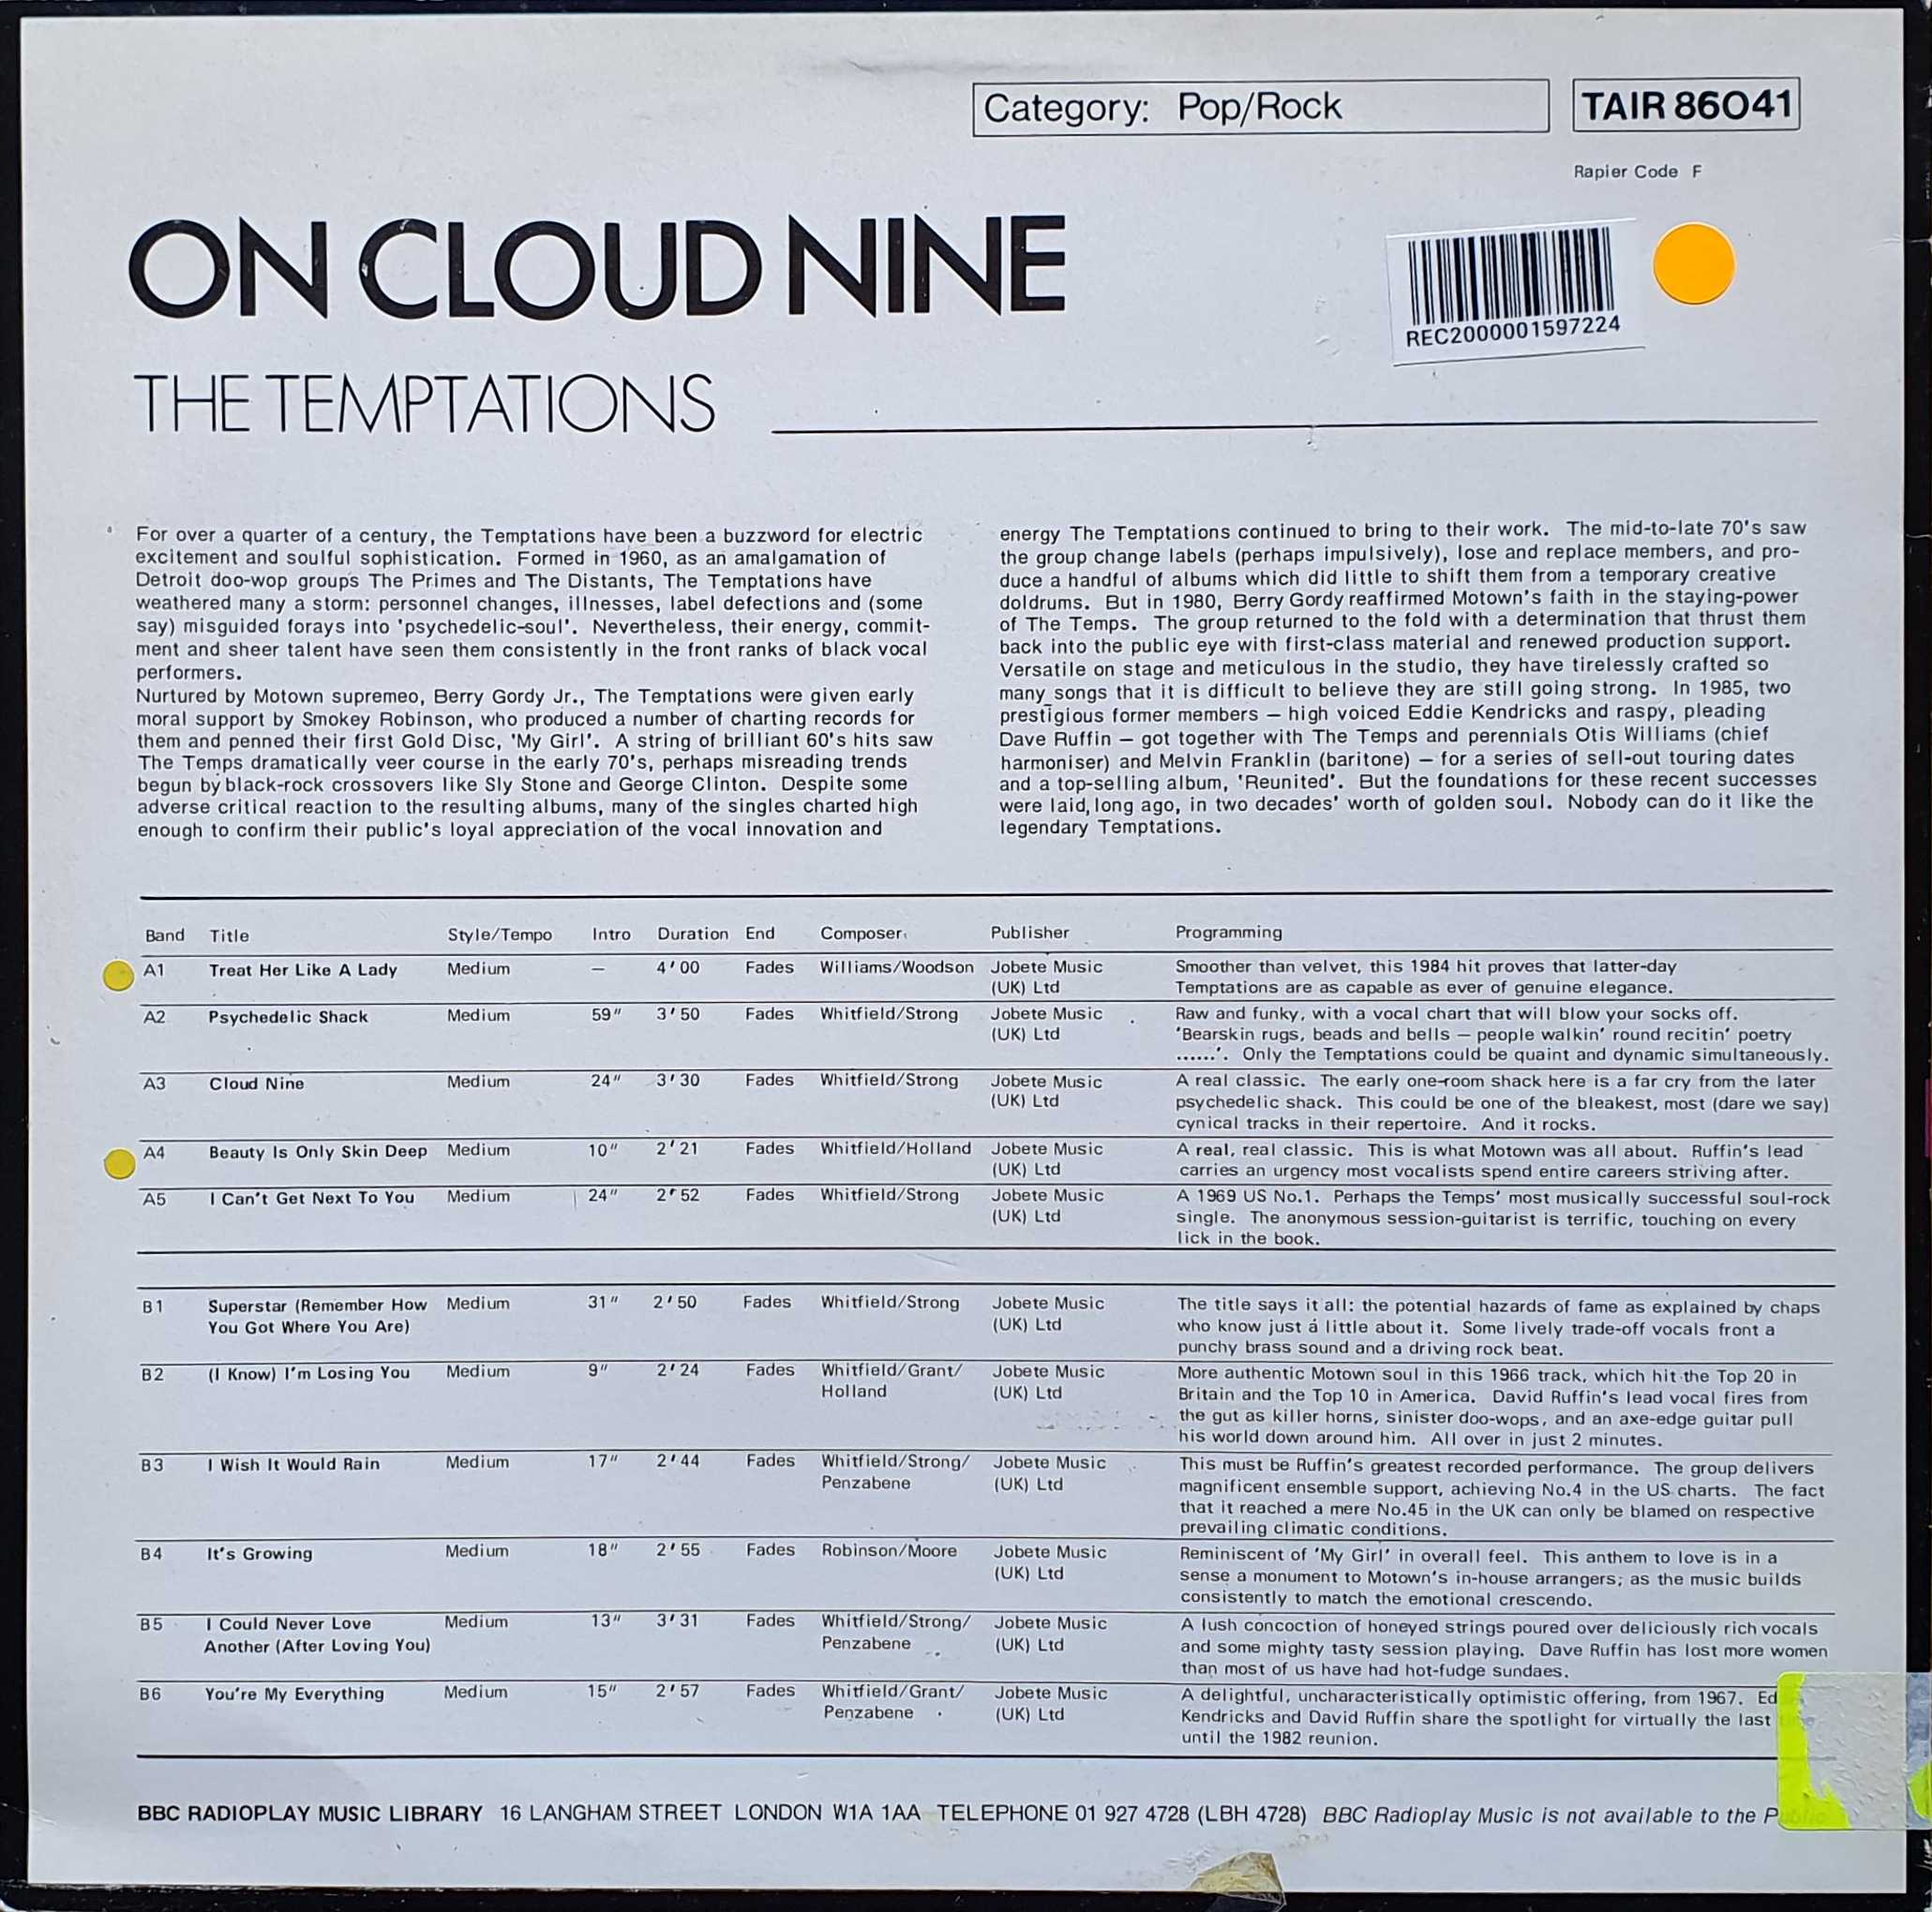 Picture of TAIR 86041 On cloud nine by artist The Temptations from the BBC records and Tapes library